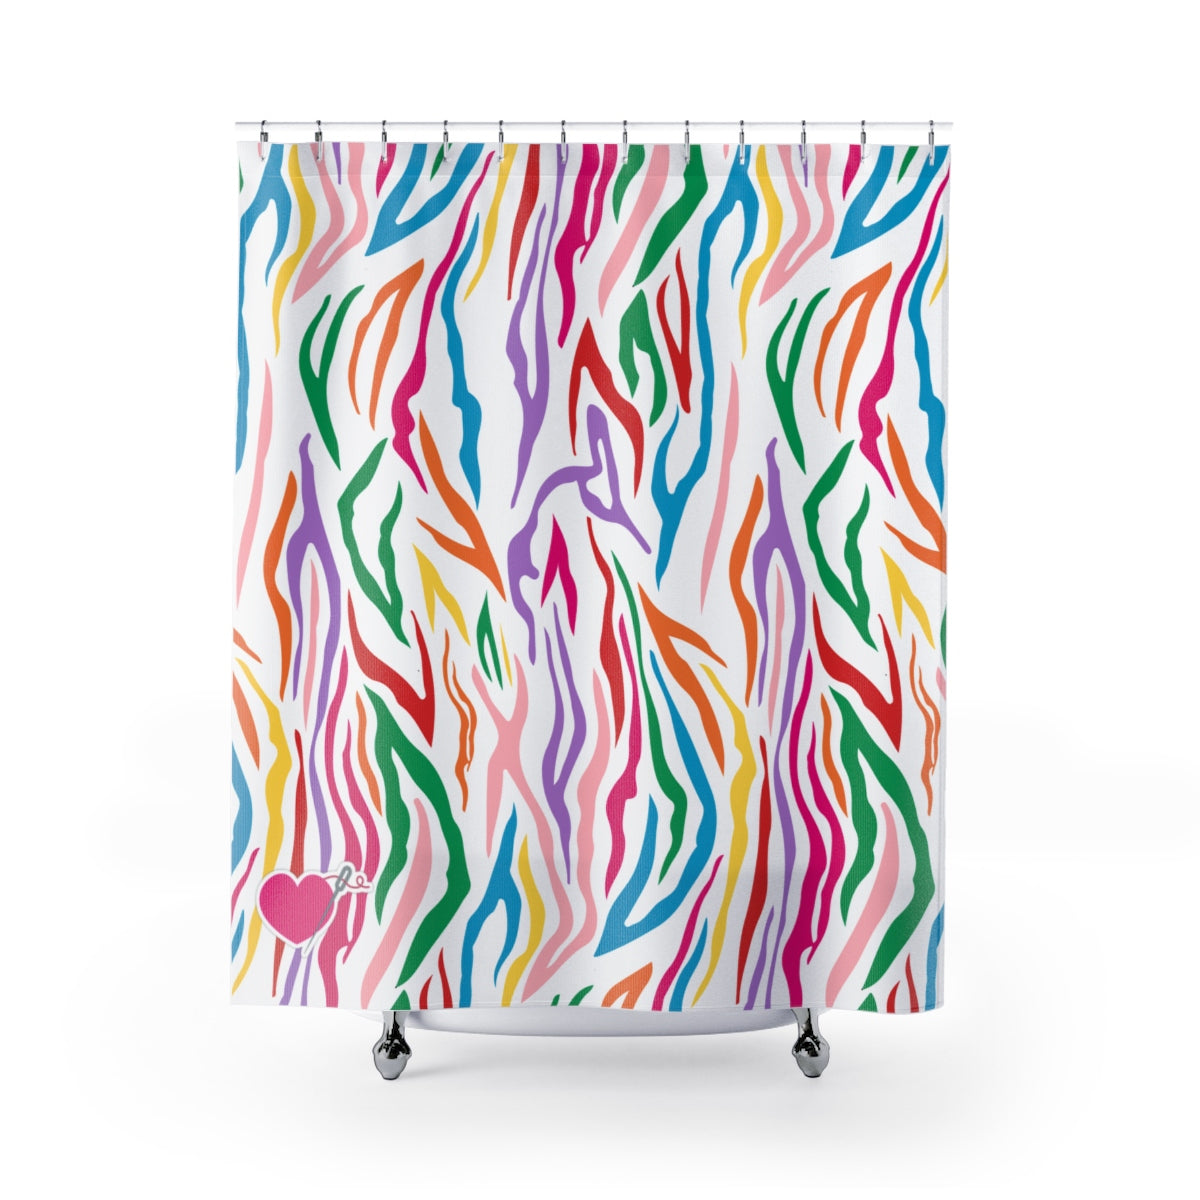 THE MISSY SHOWER CURTAIN 71" X 74"